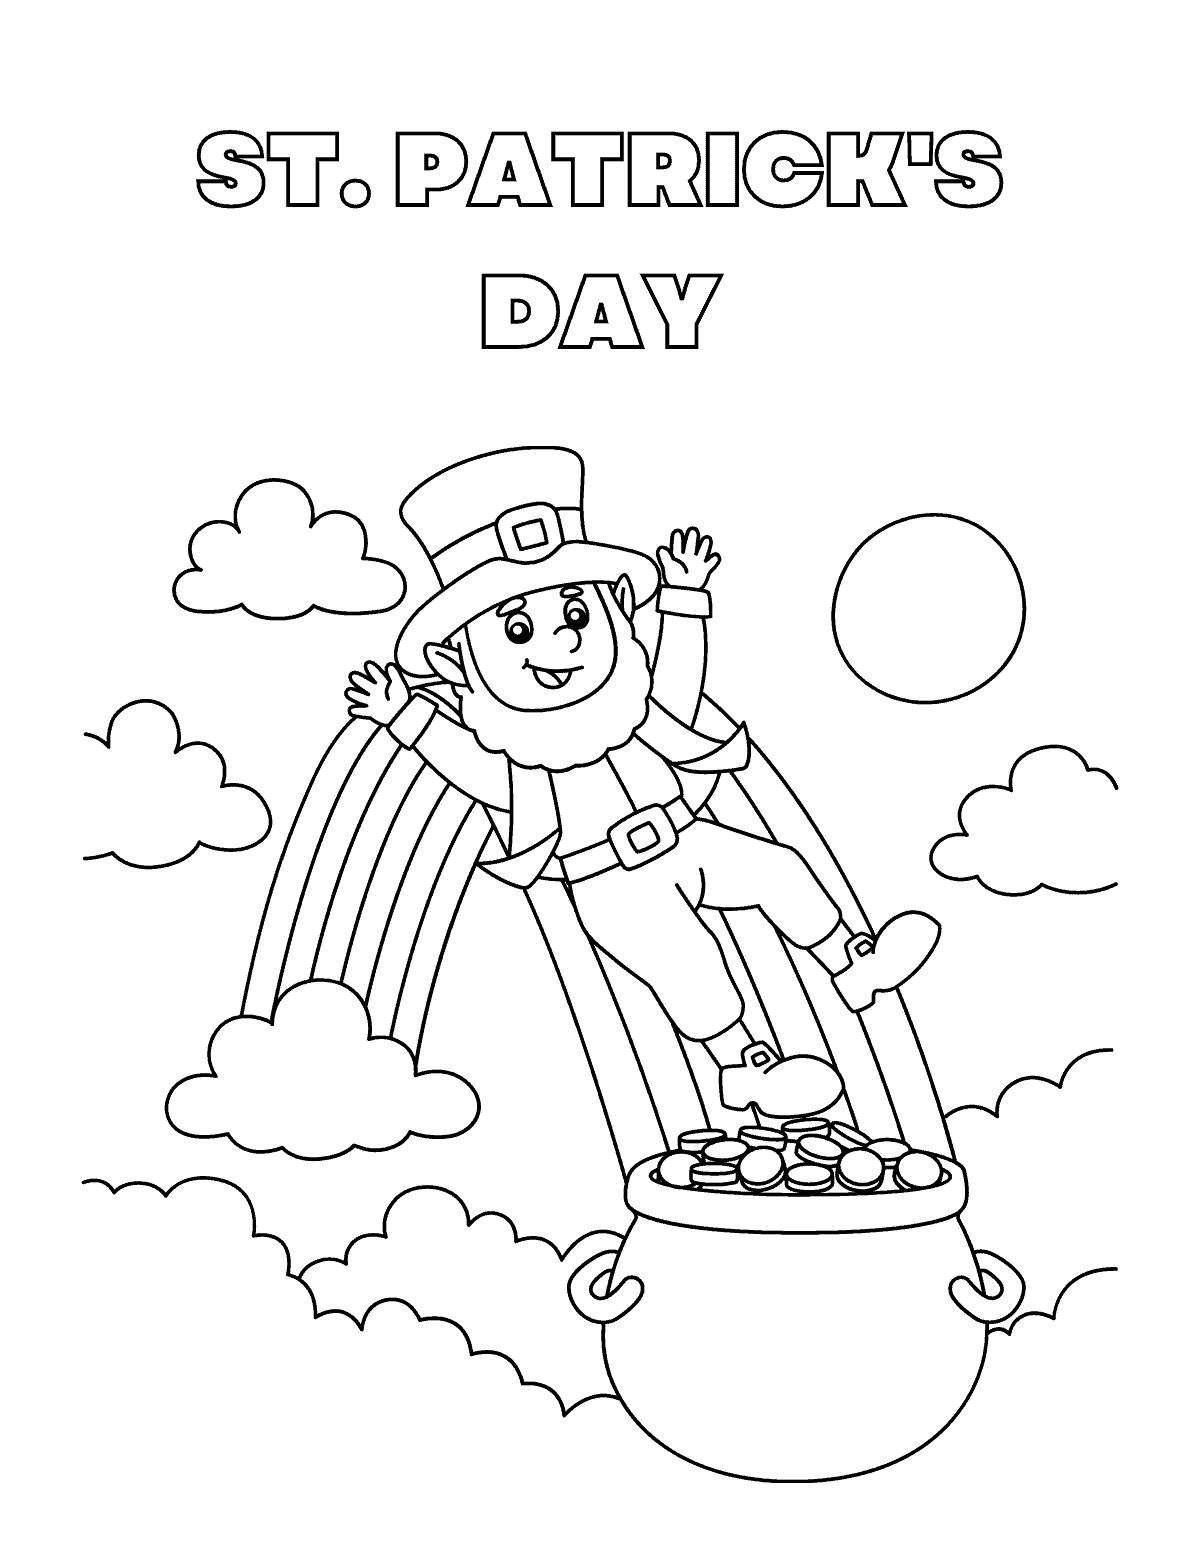 Rainbow, Pot Of Gold and Leprechaun Coloring Page